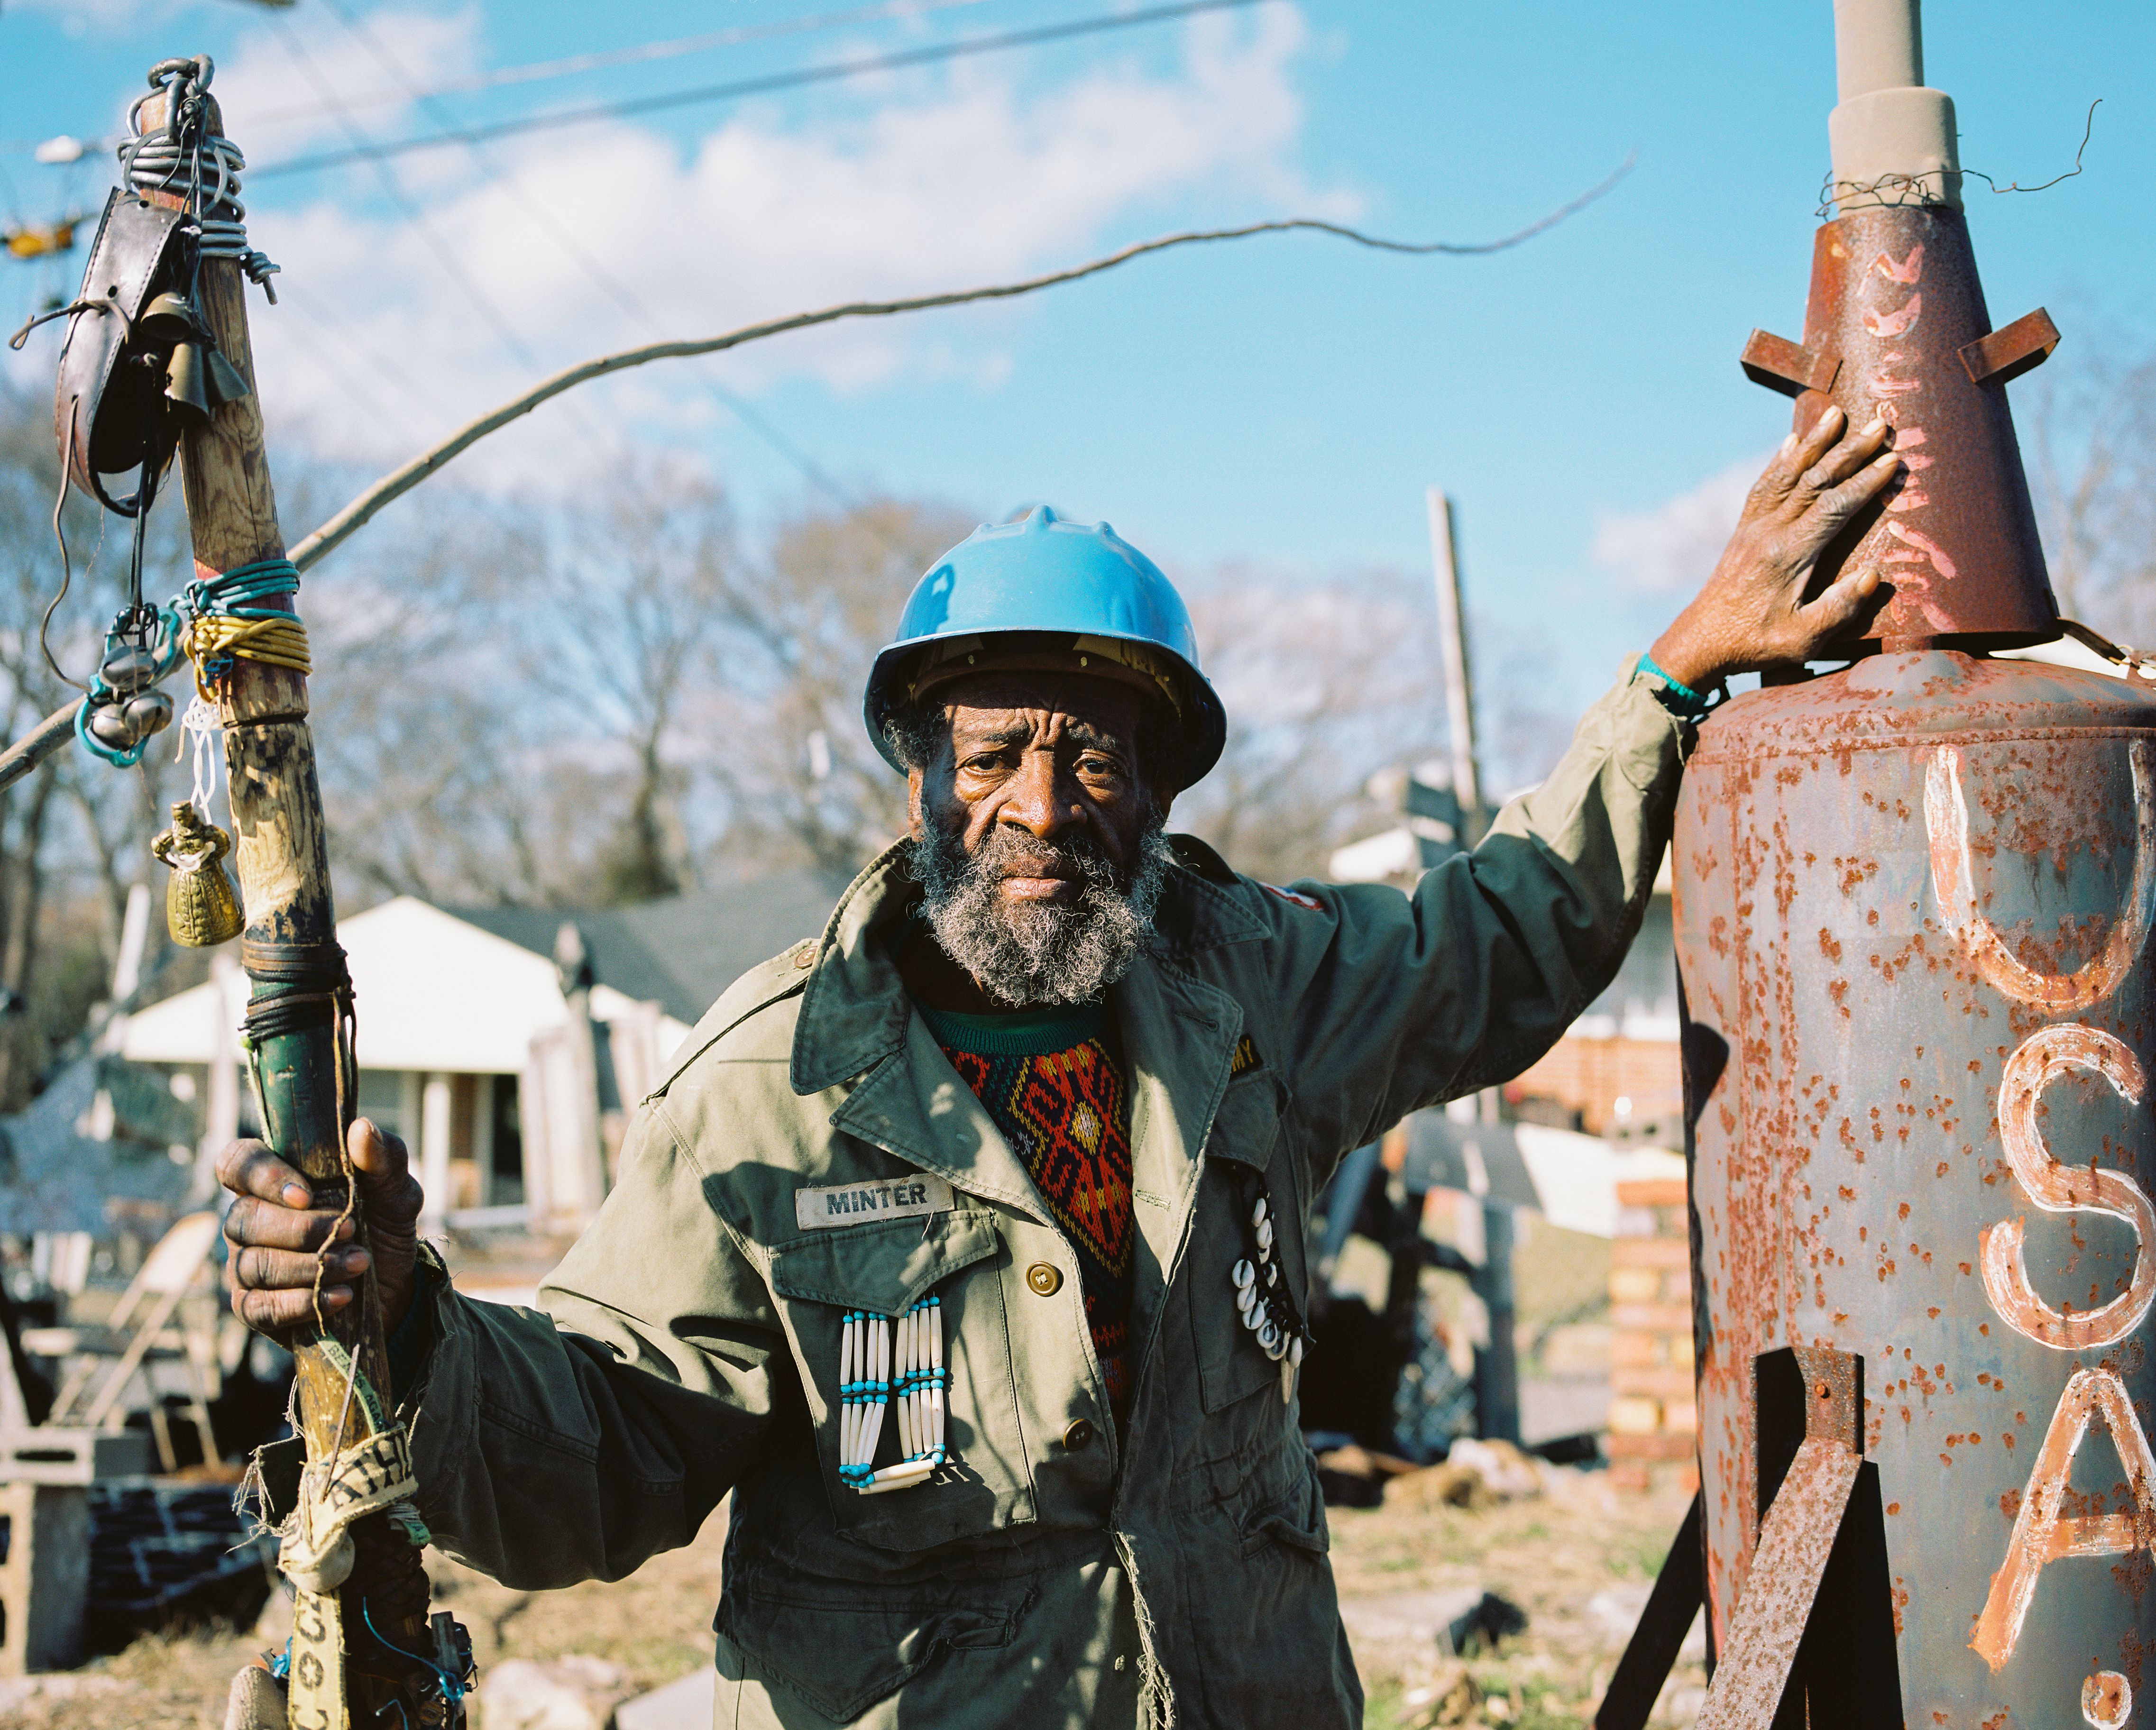 Joe holding a handmade sculptural staff, wearing a blue hardhat and old army jacket